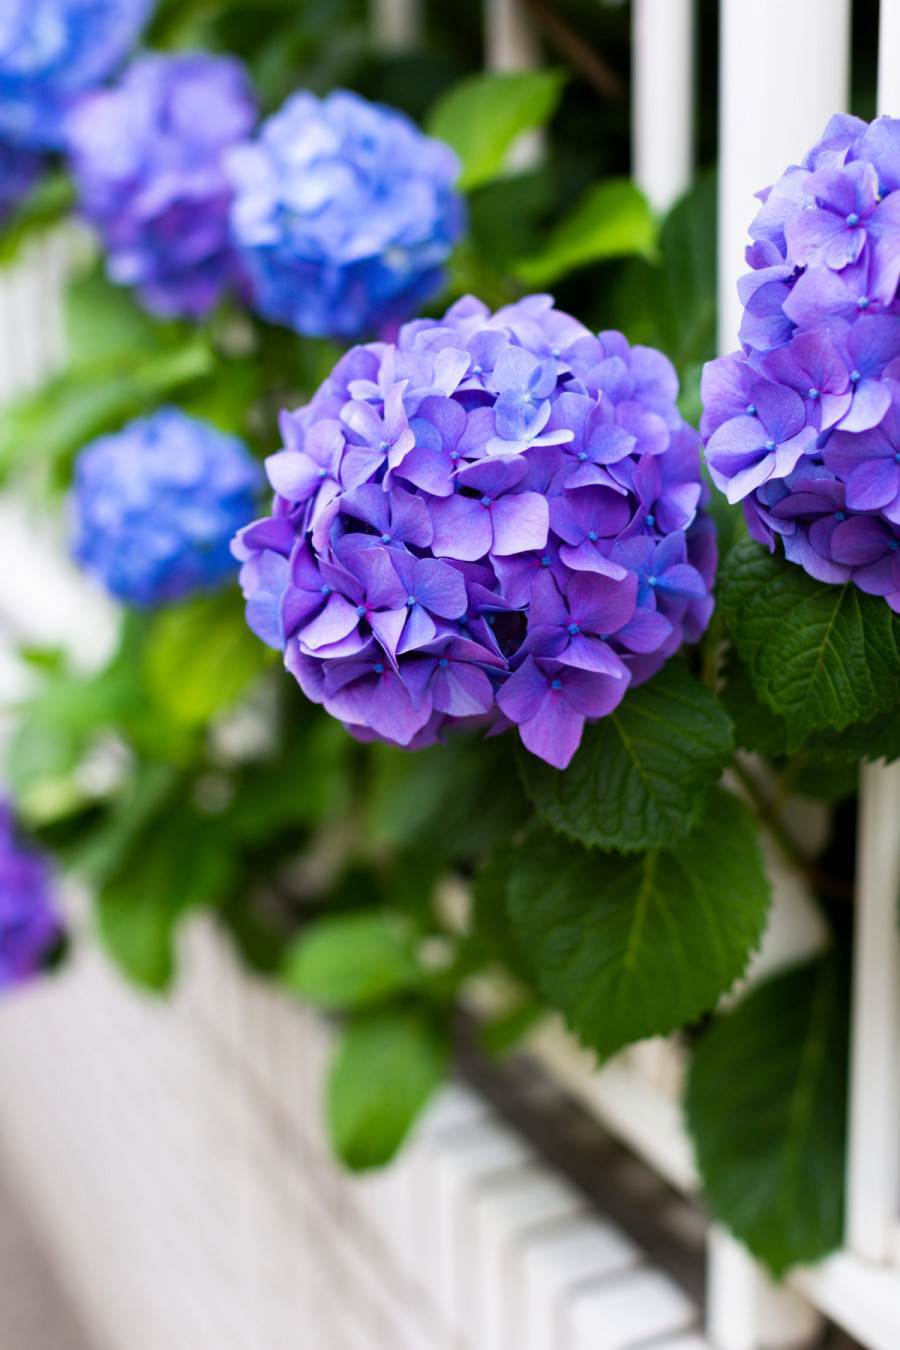 PLANTING HYDRANGEAS IN POTS AND URNS